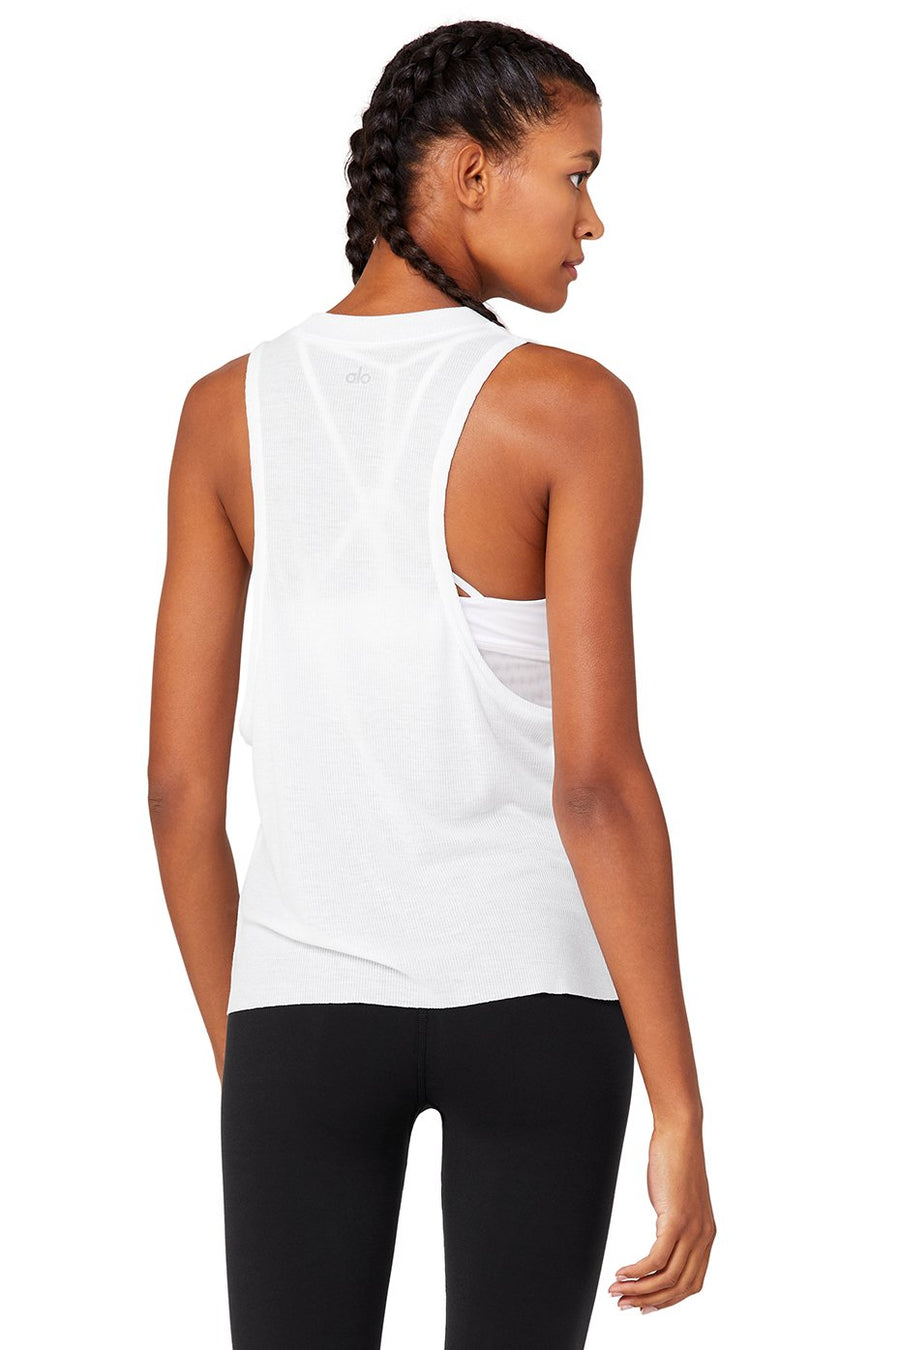 IN STORE ONLY - Heat Wave Tank - White - Shop Yu Fashion